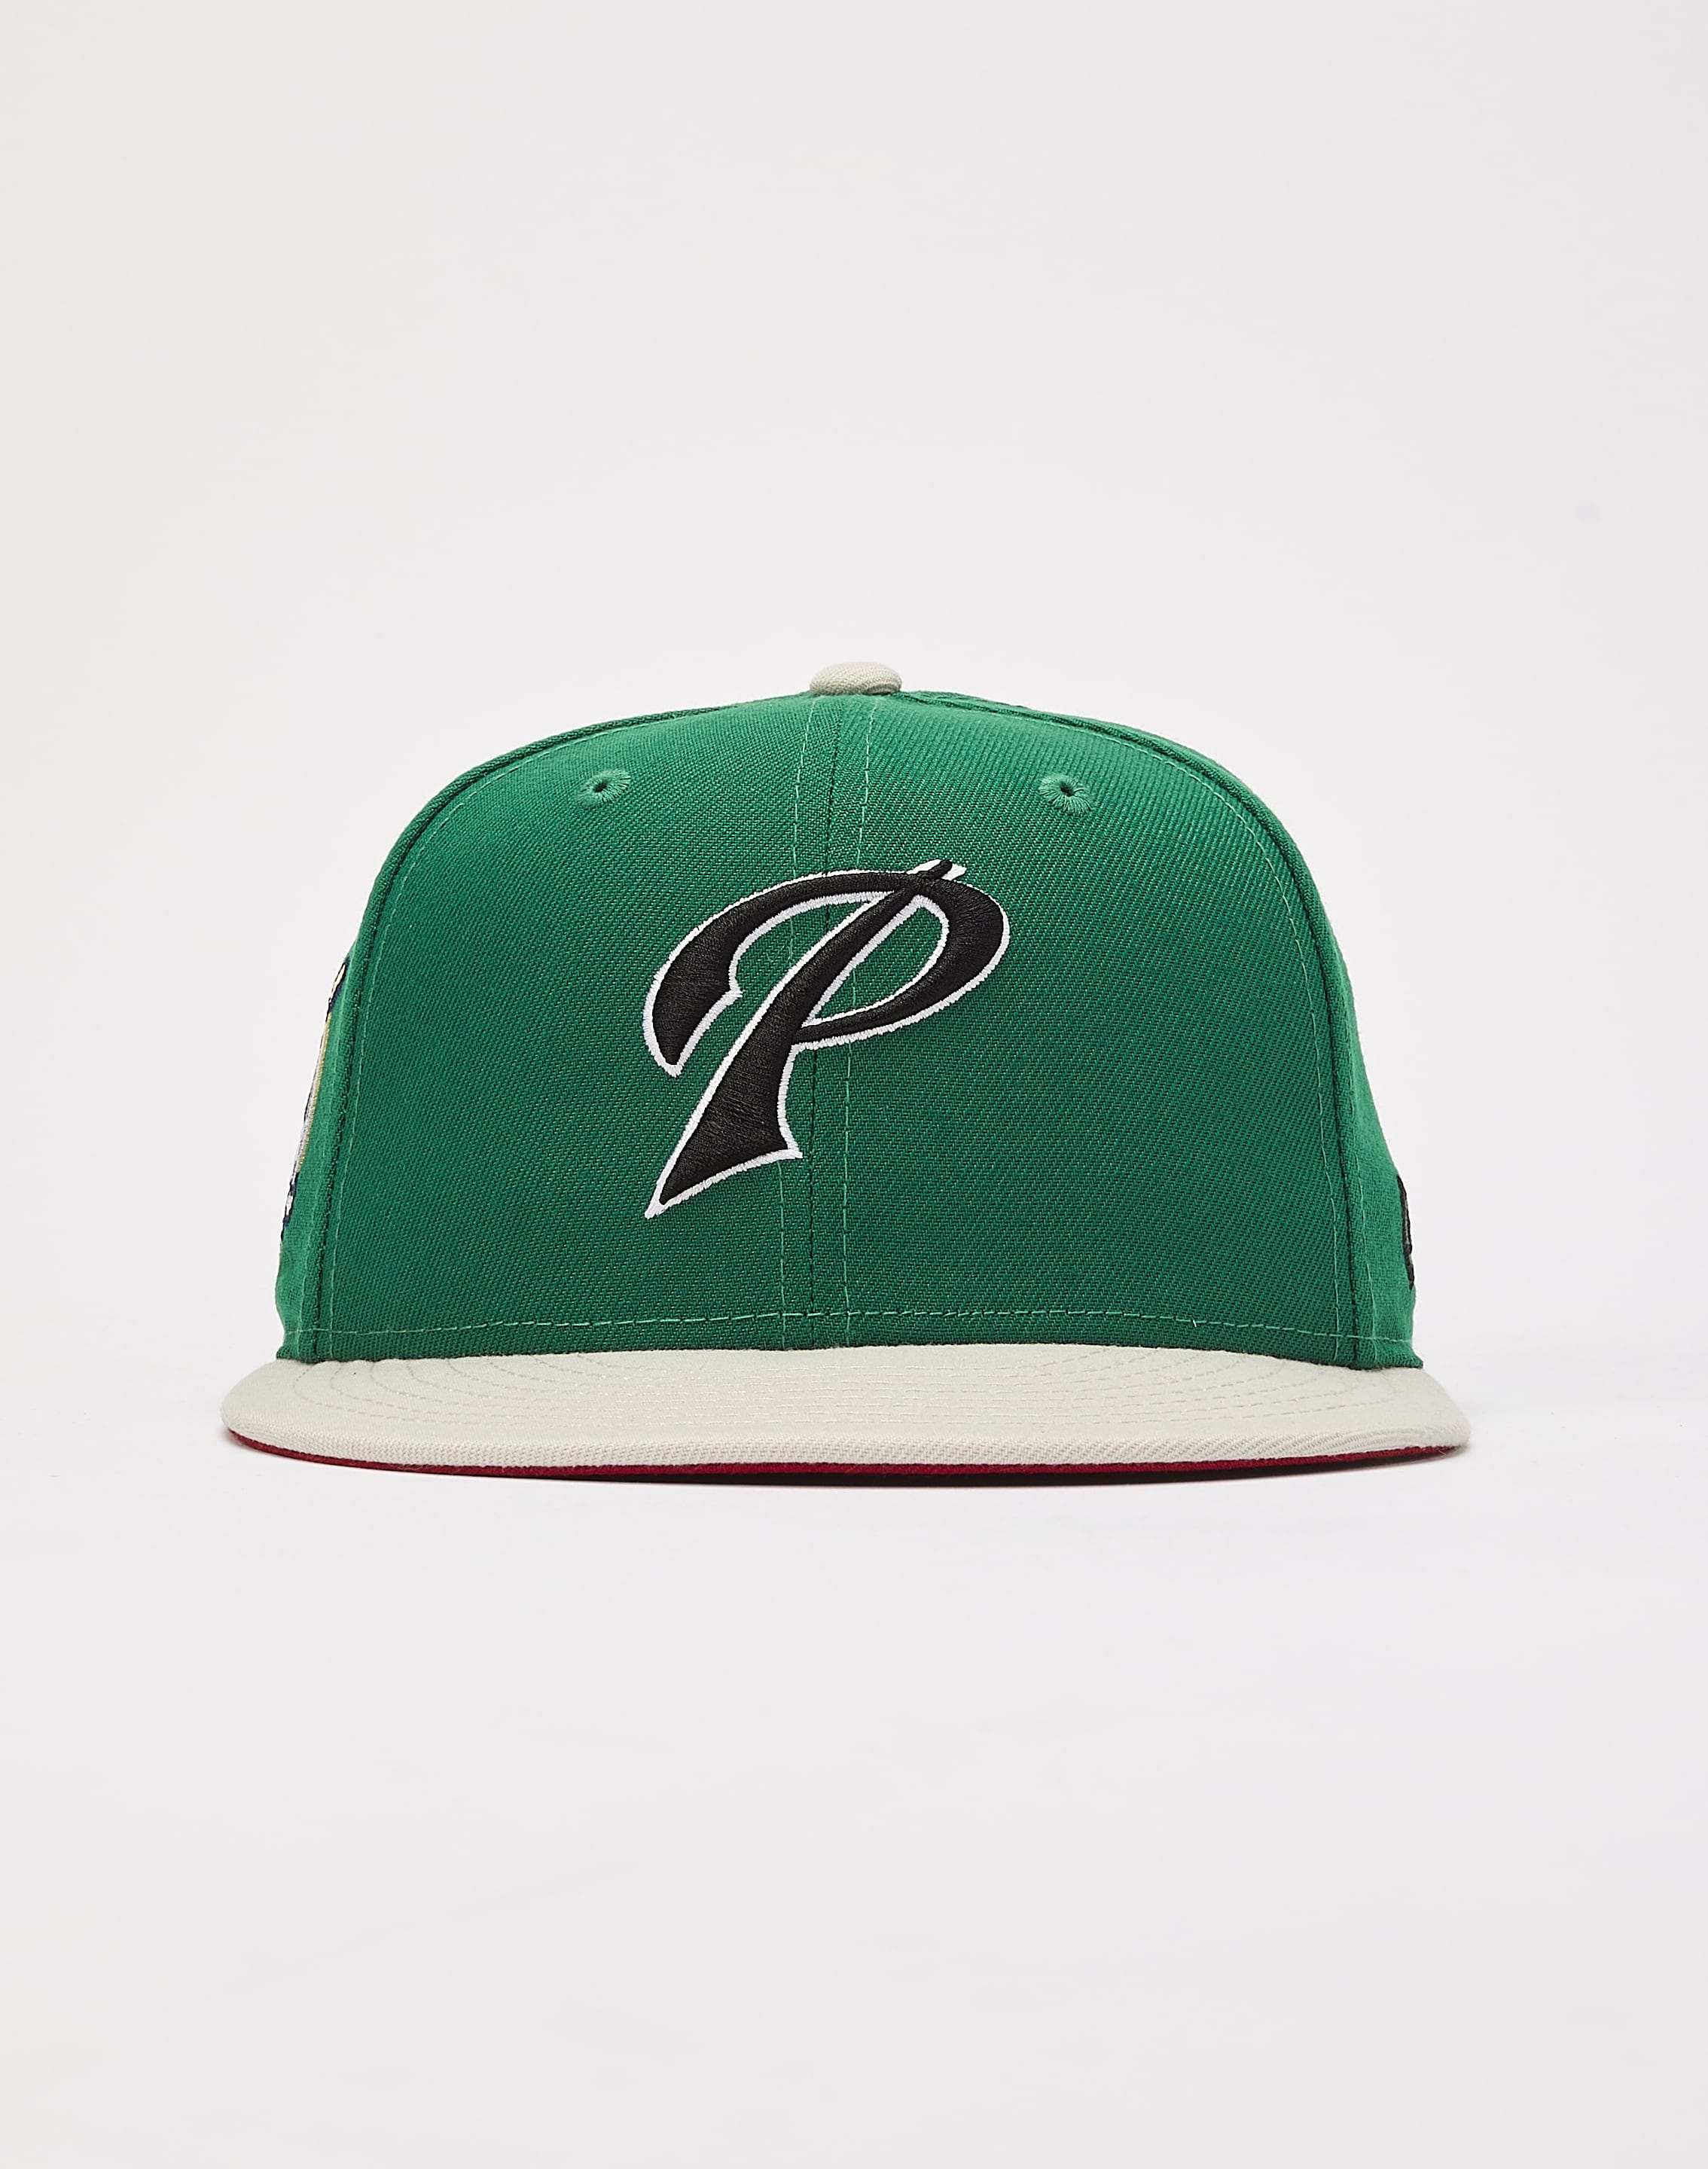 New Era San Diego Padres 9Fifty Snapback Hat – DTLR